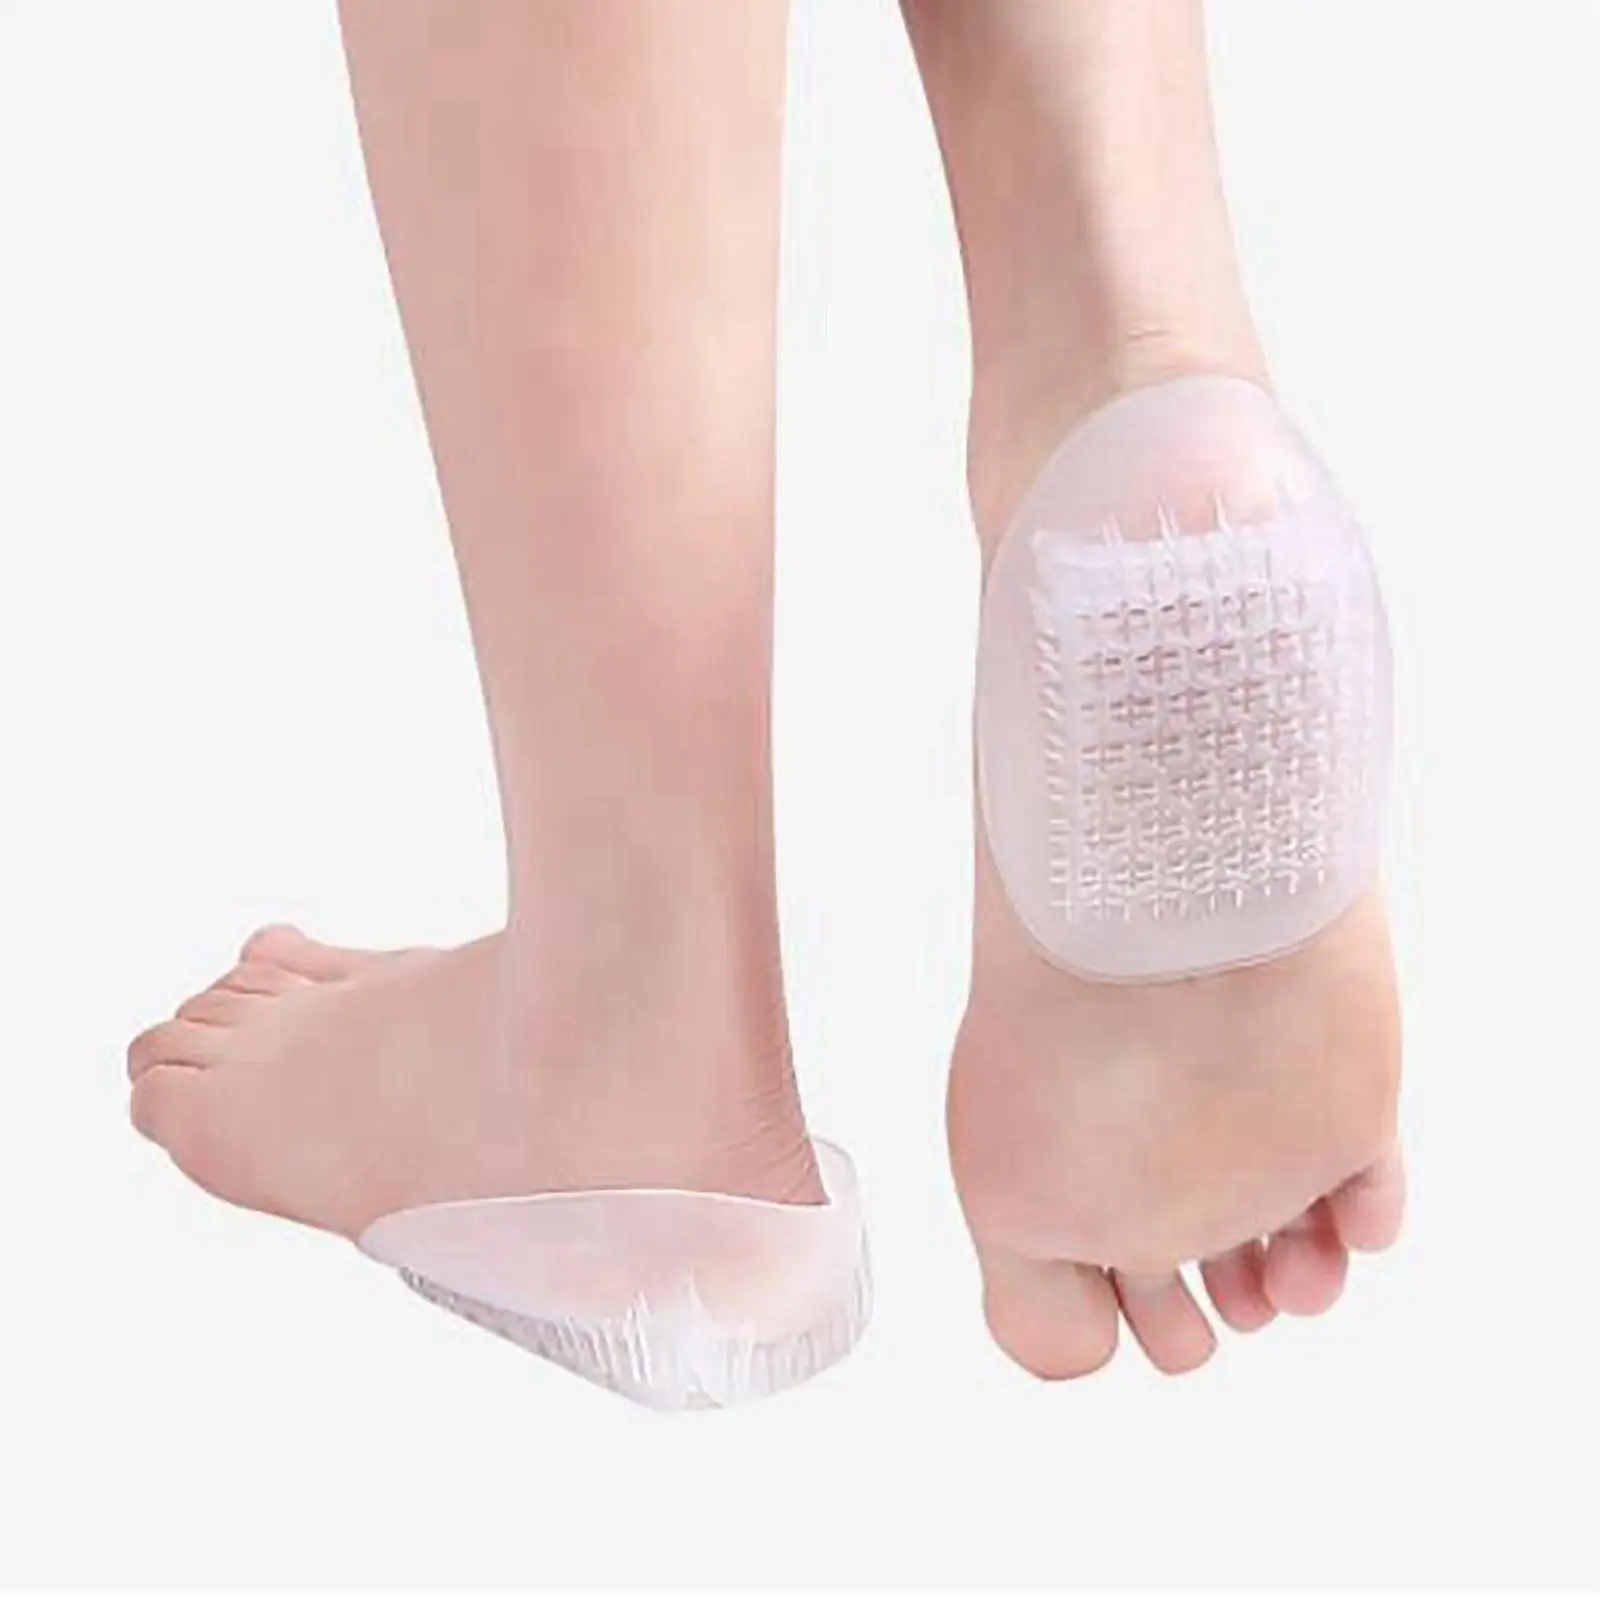 1 Pair U-Shaped Gel Heel Cups Reduce Swelling Shock Absorption Soft Inserts for Plantar Fasciitis Heel Cracking Achilles Pain